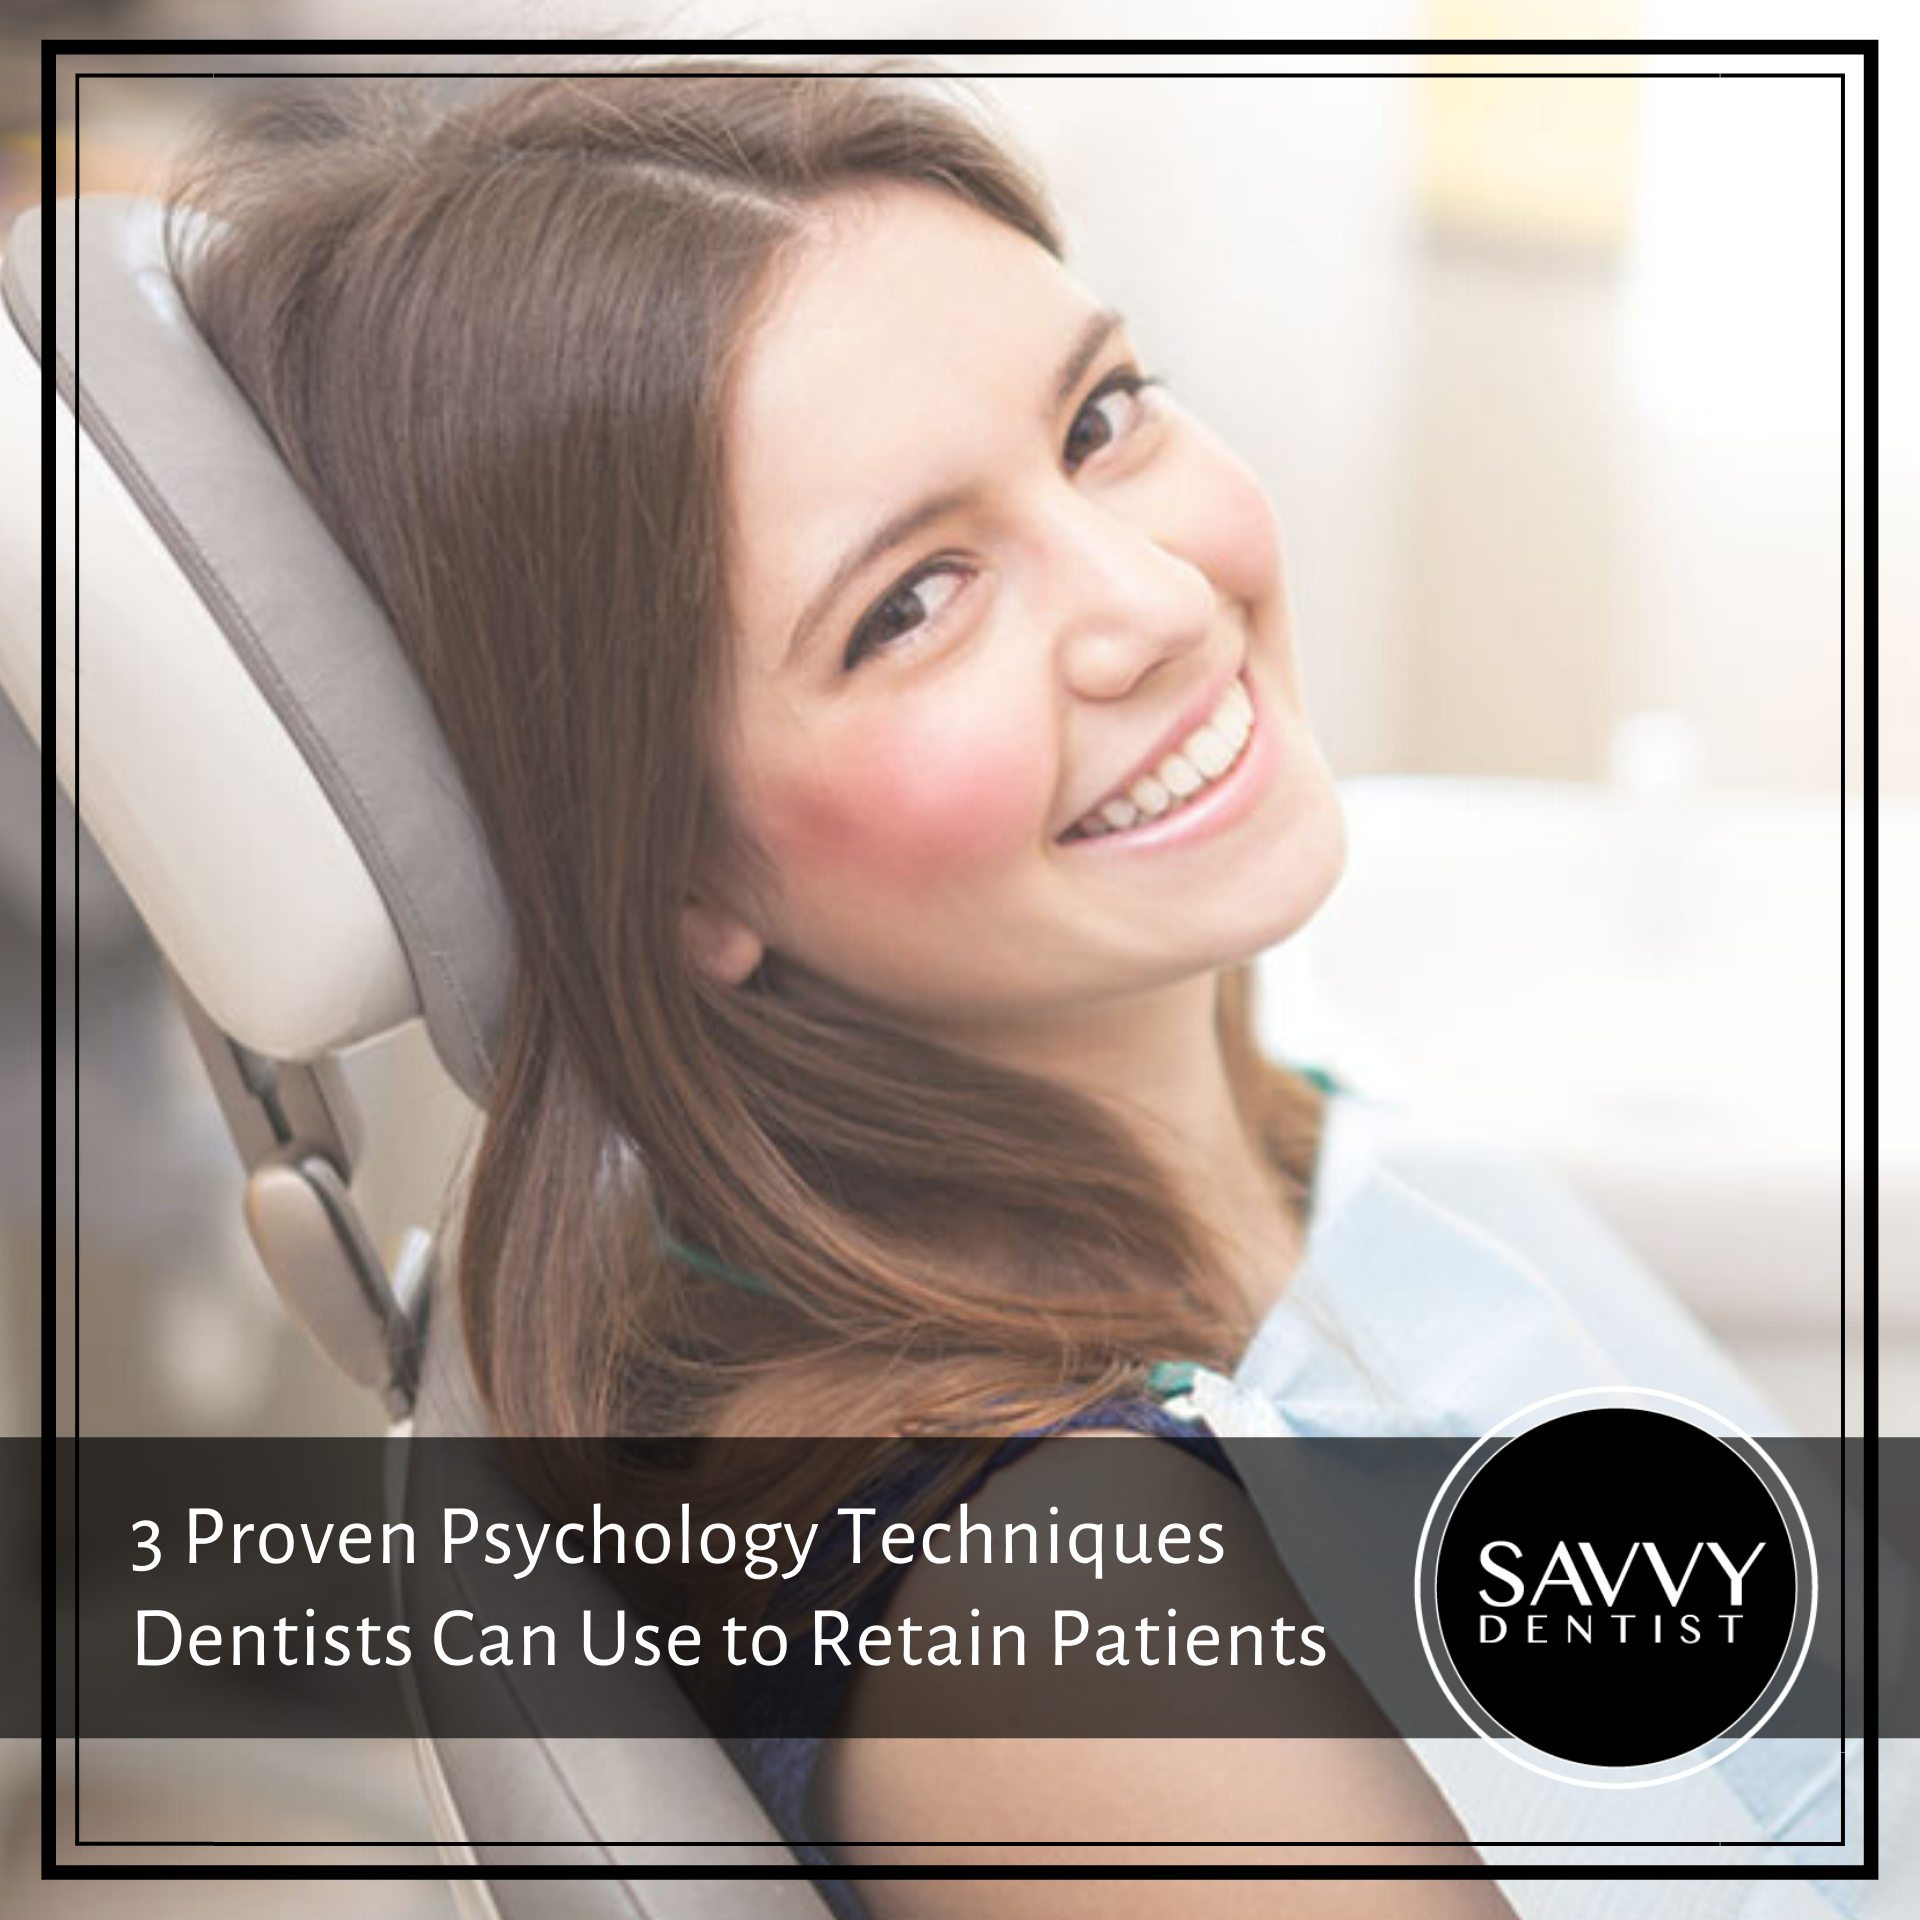 3 Proven Psychology Techniques Dentists Can Use to Retain Patients